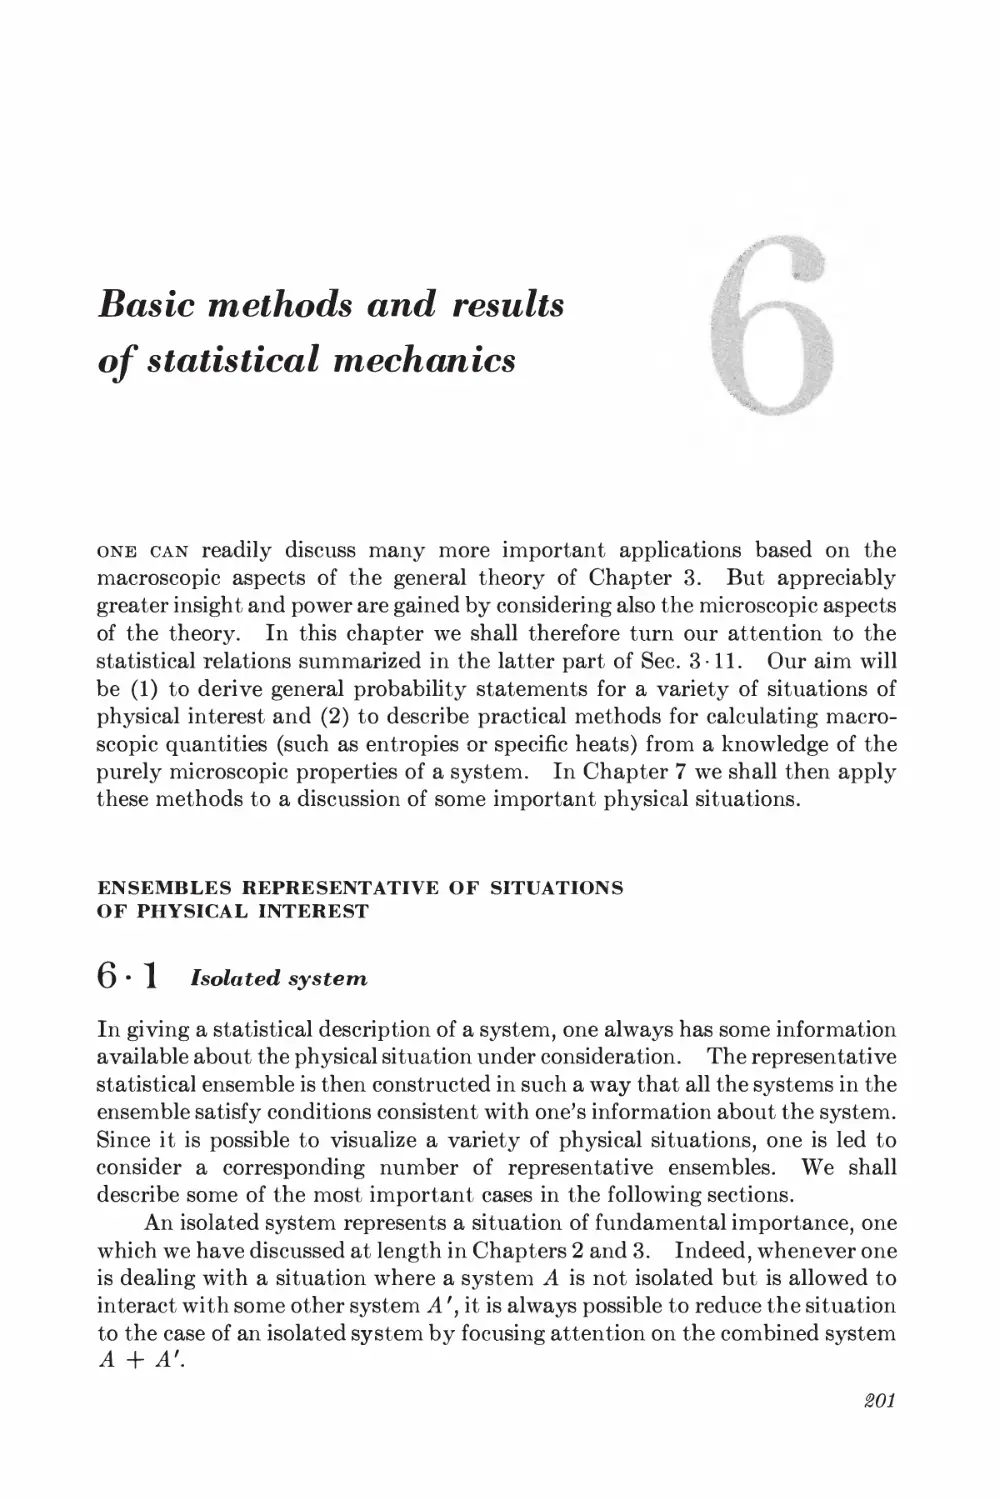 Chapter 6: Basic Methods and Results of Statistical Mechanics